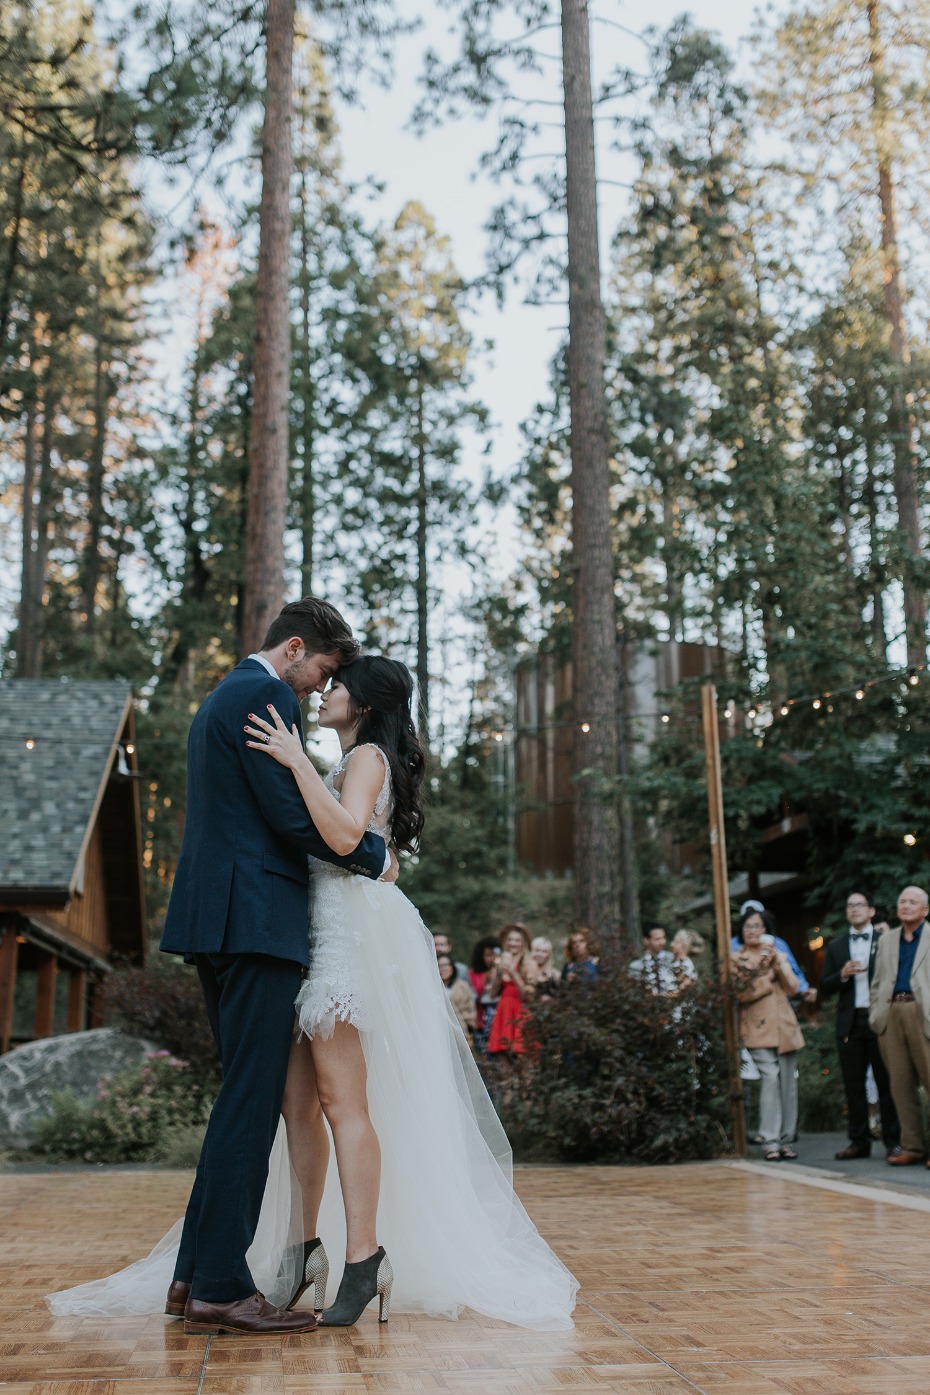 First dance in the woods